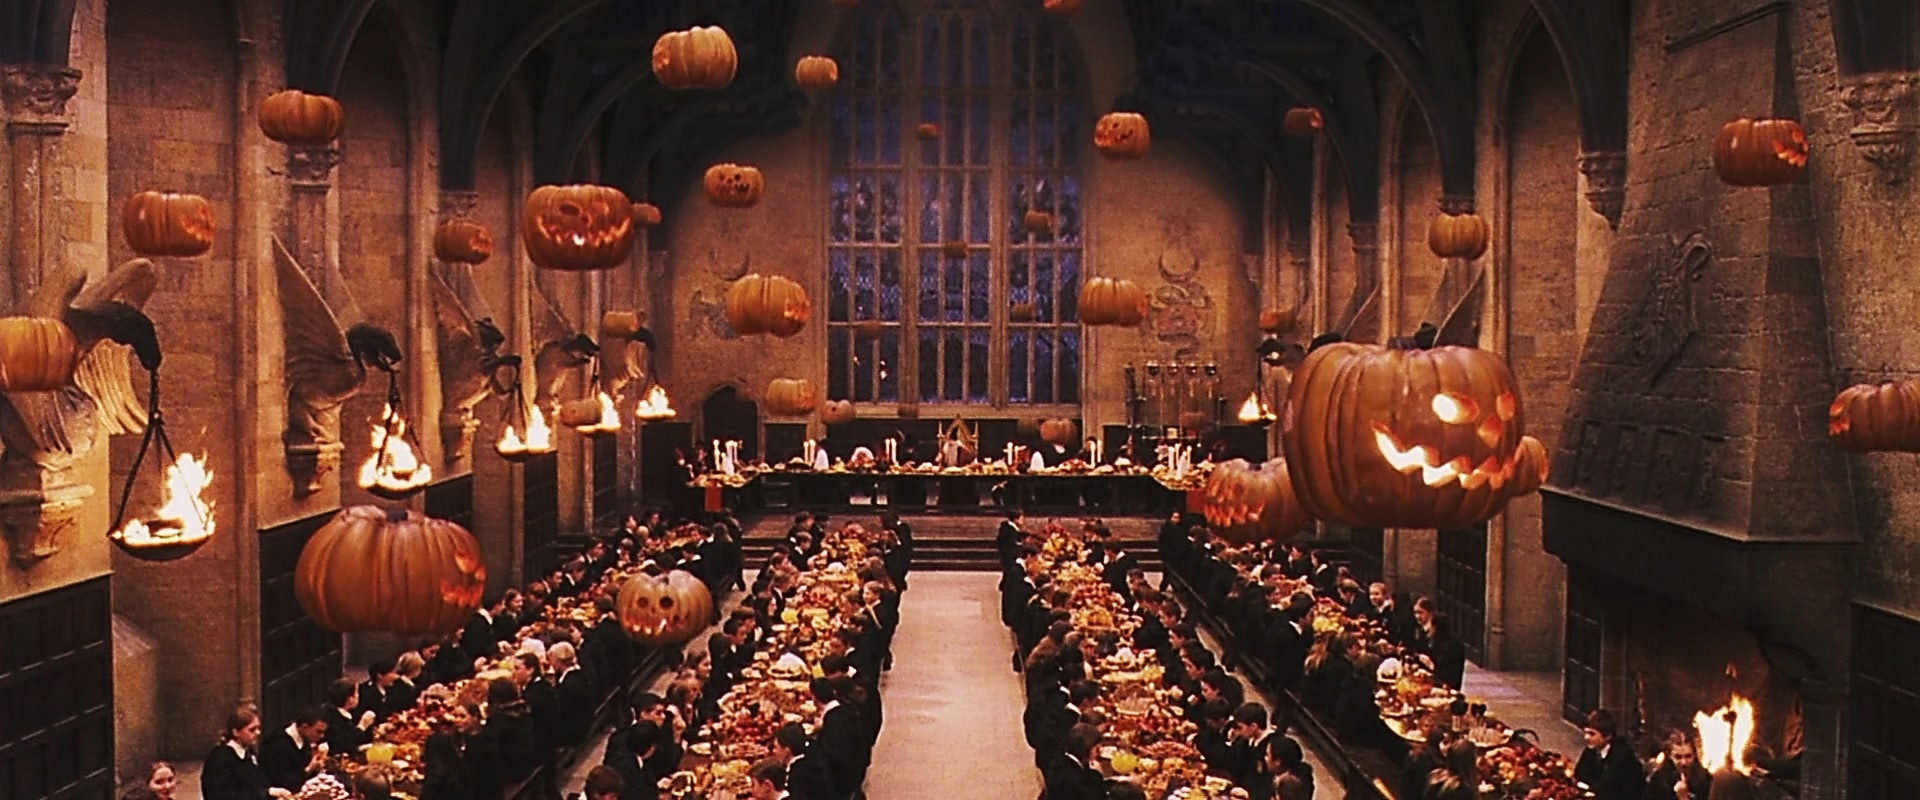 A Harry Potter Halloween Feast Is Happening In The IRL Great Hall & You Can Buy Tickets Soon